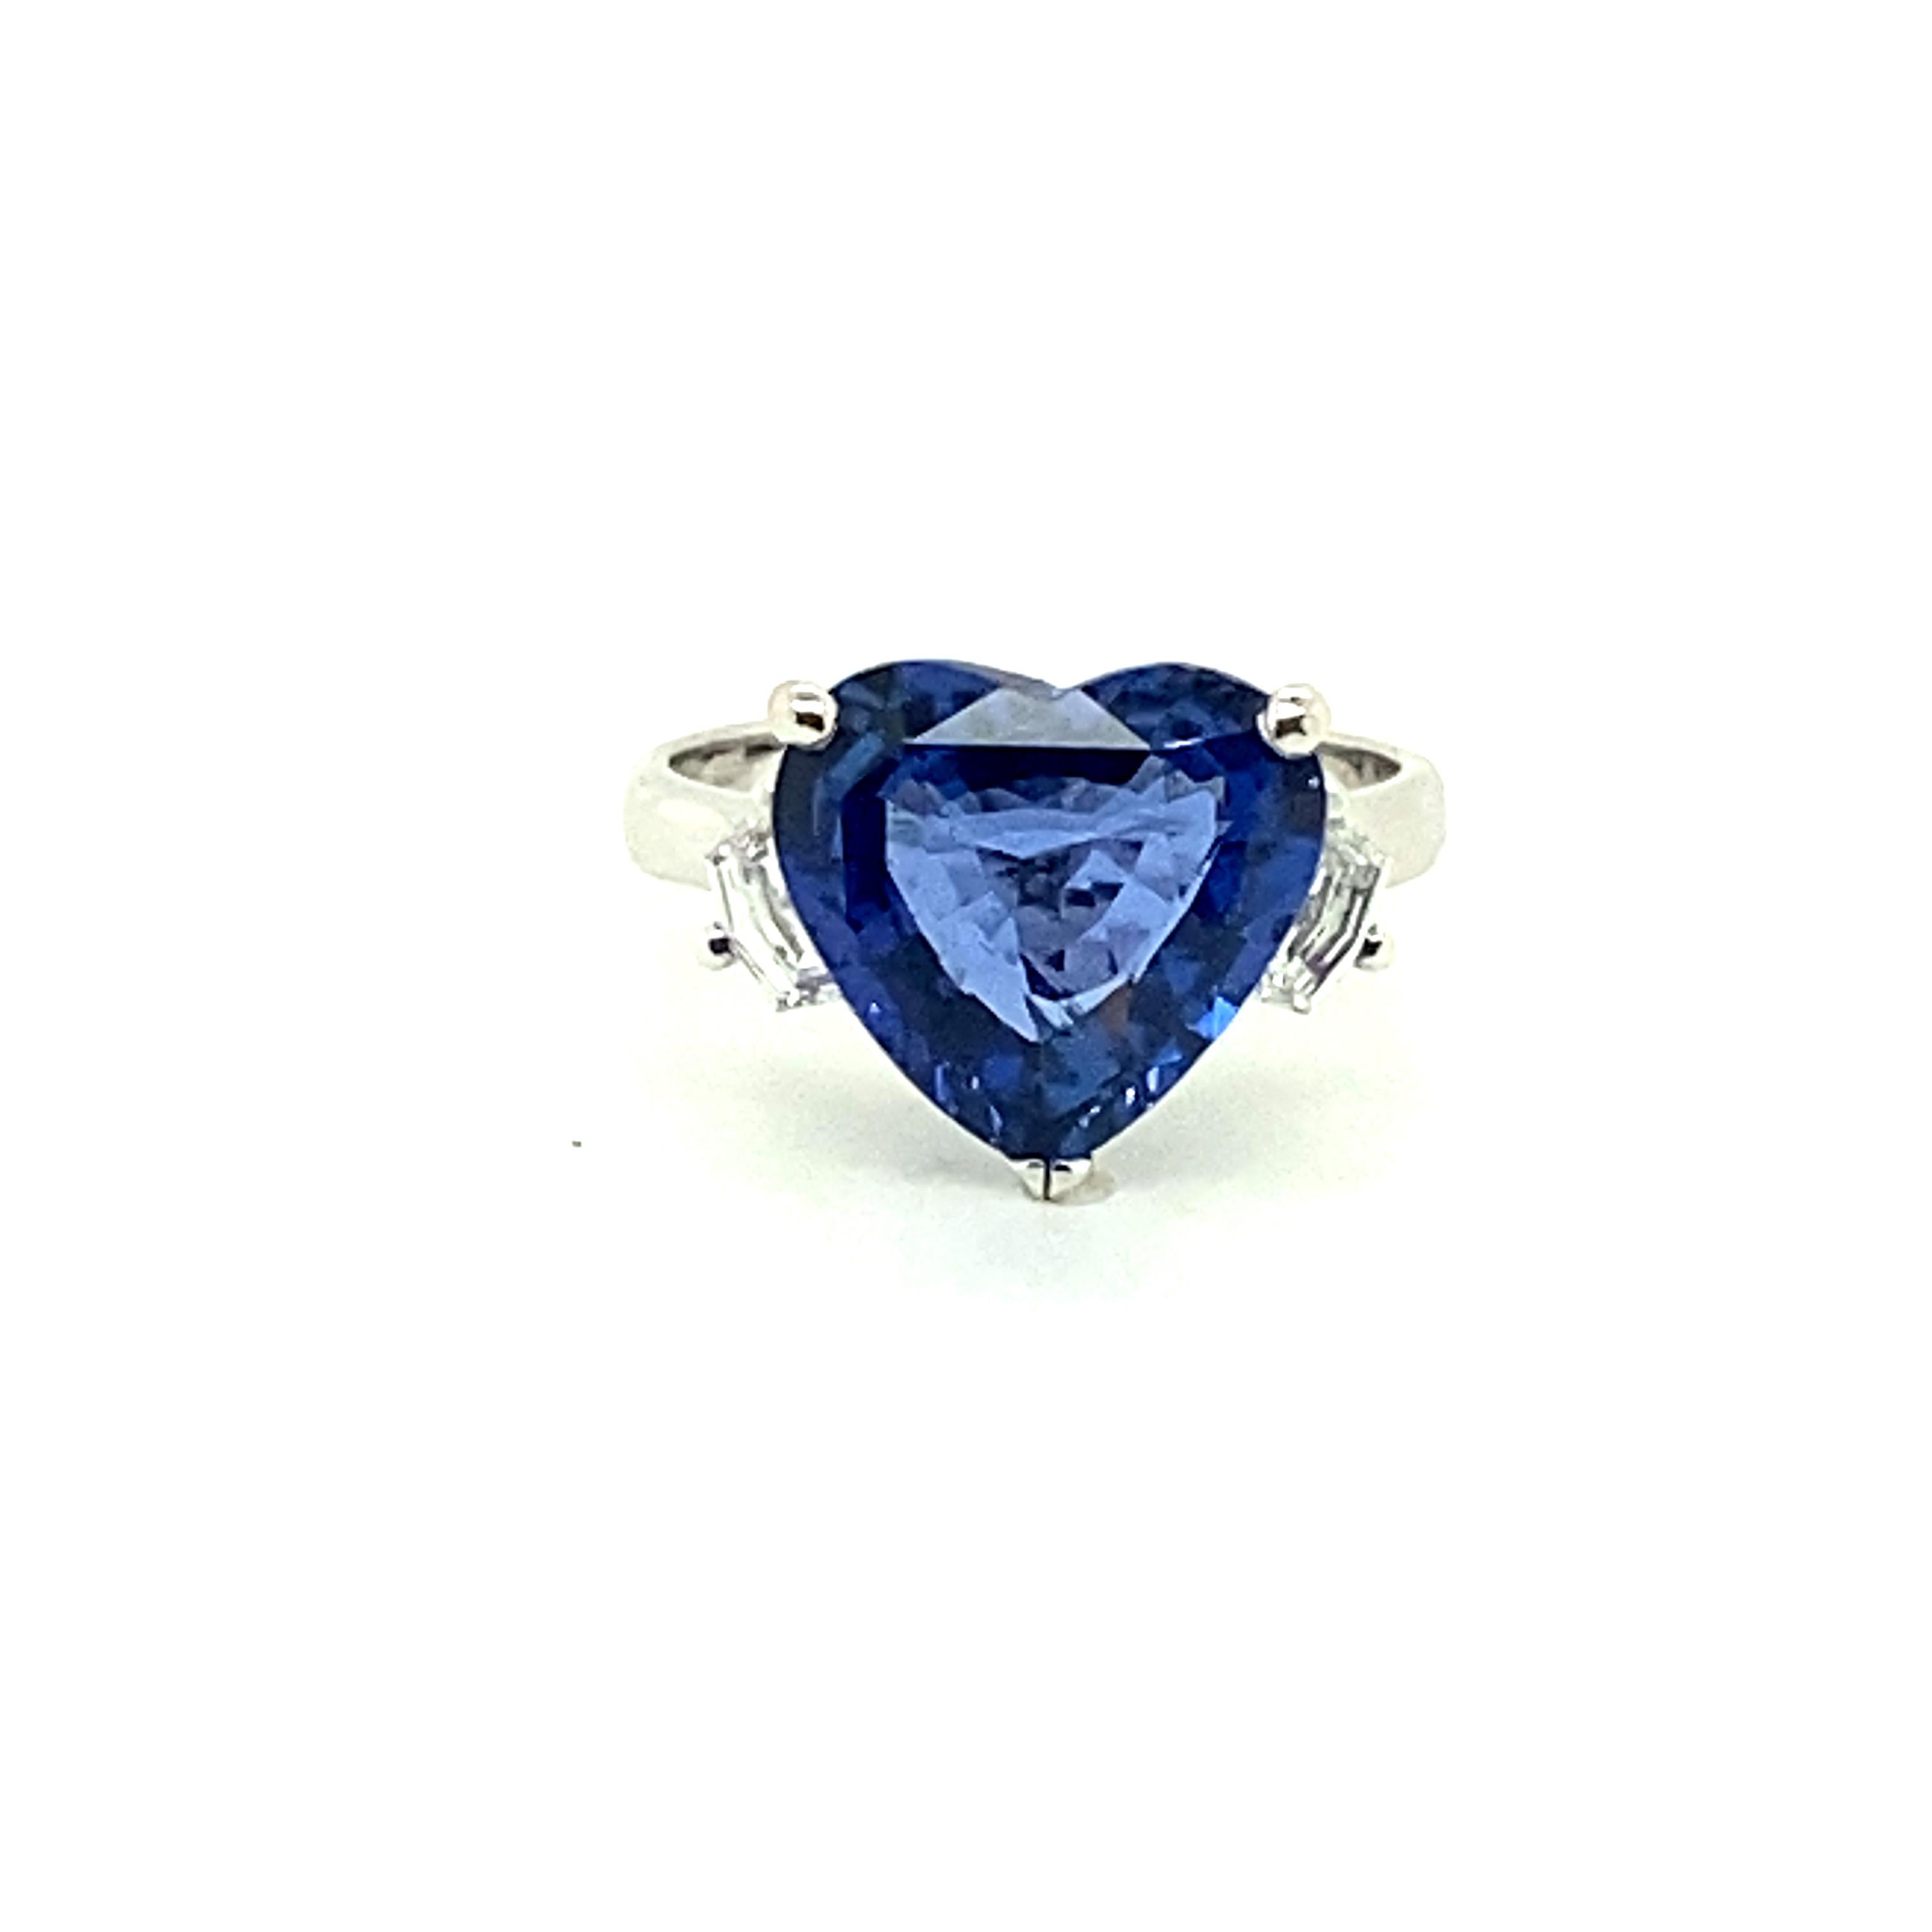 5.04 Carat Heart-Shape Vivid Blue Ceylon Sapphire and White Diamond Ring:

A gorgeous ring, it features an elegant heart-shaped natural heated Ceylon vivid blue sapphire weighing 5.04 carat, with white fancy-cut diamonds on both sides of the